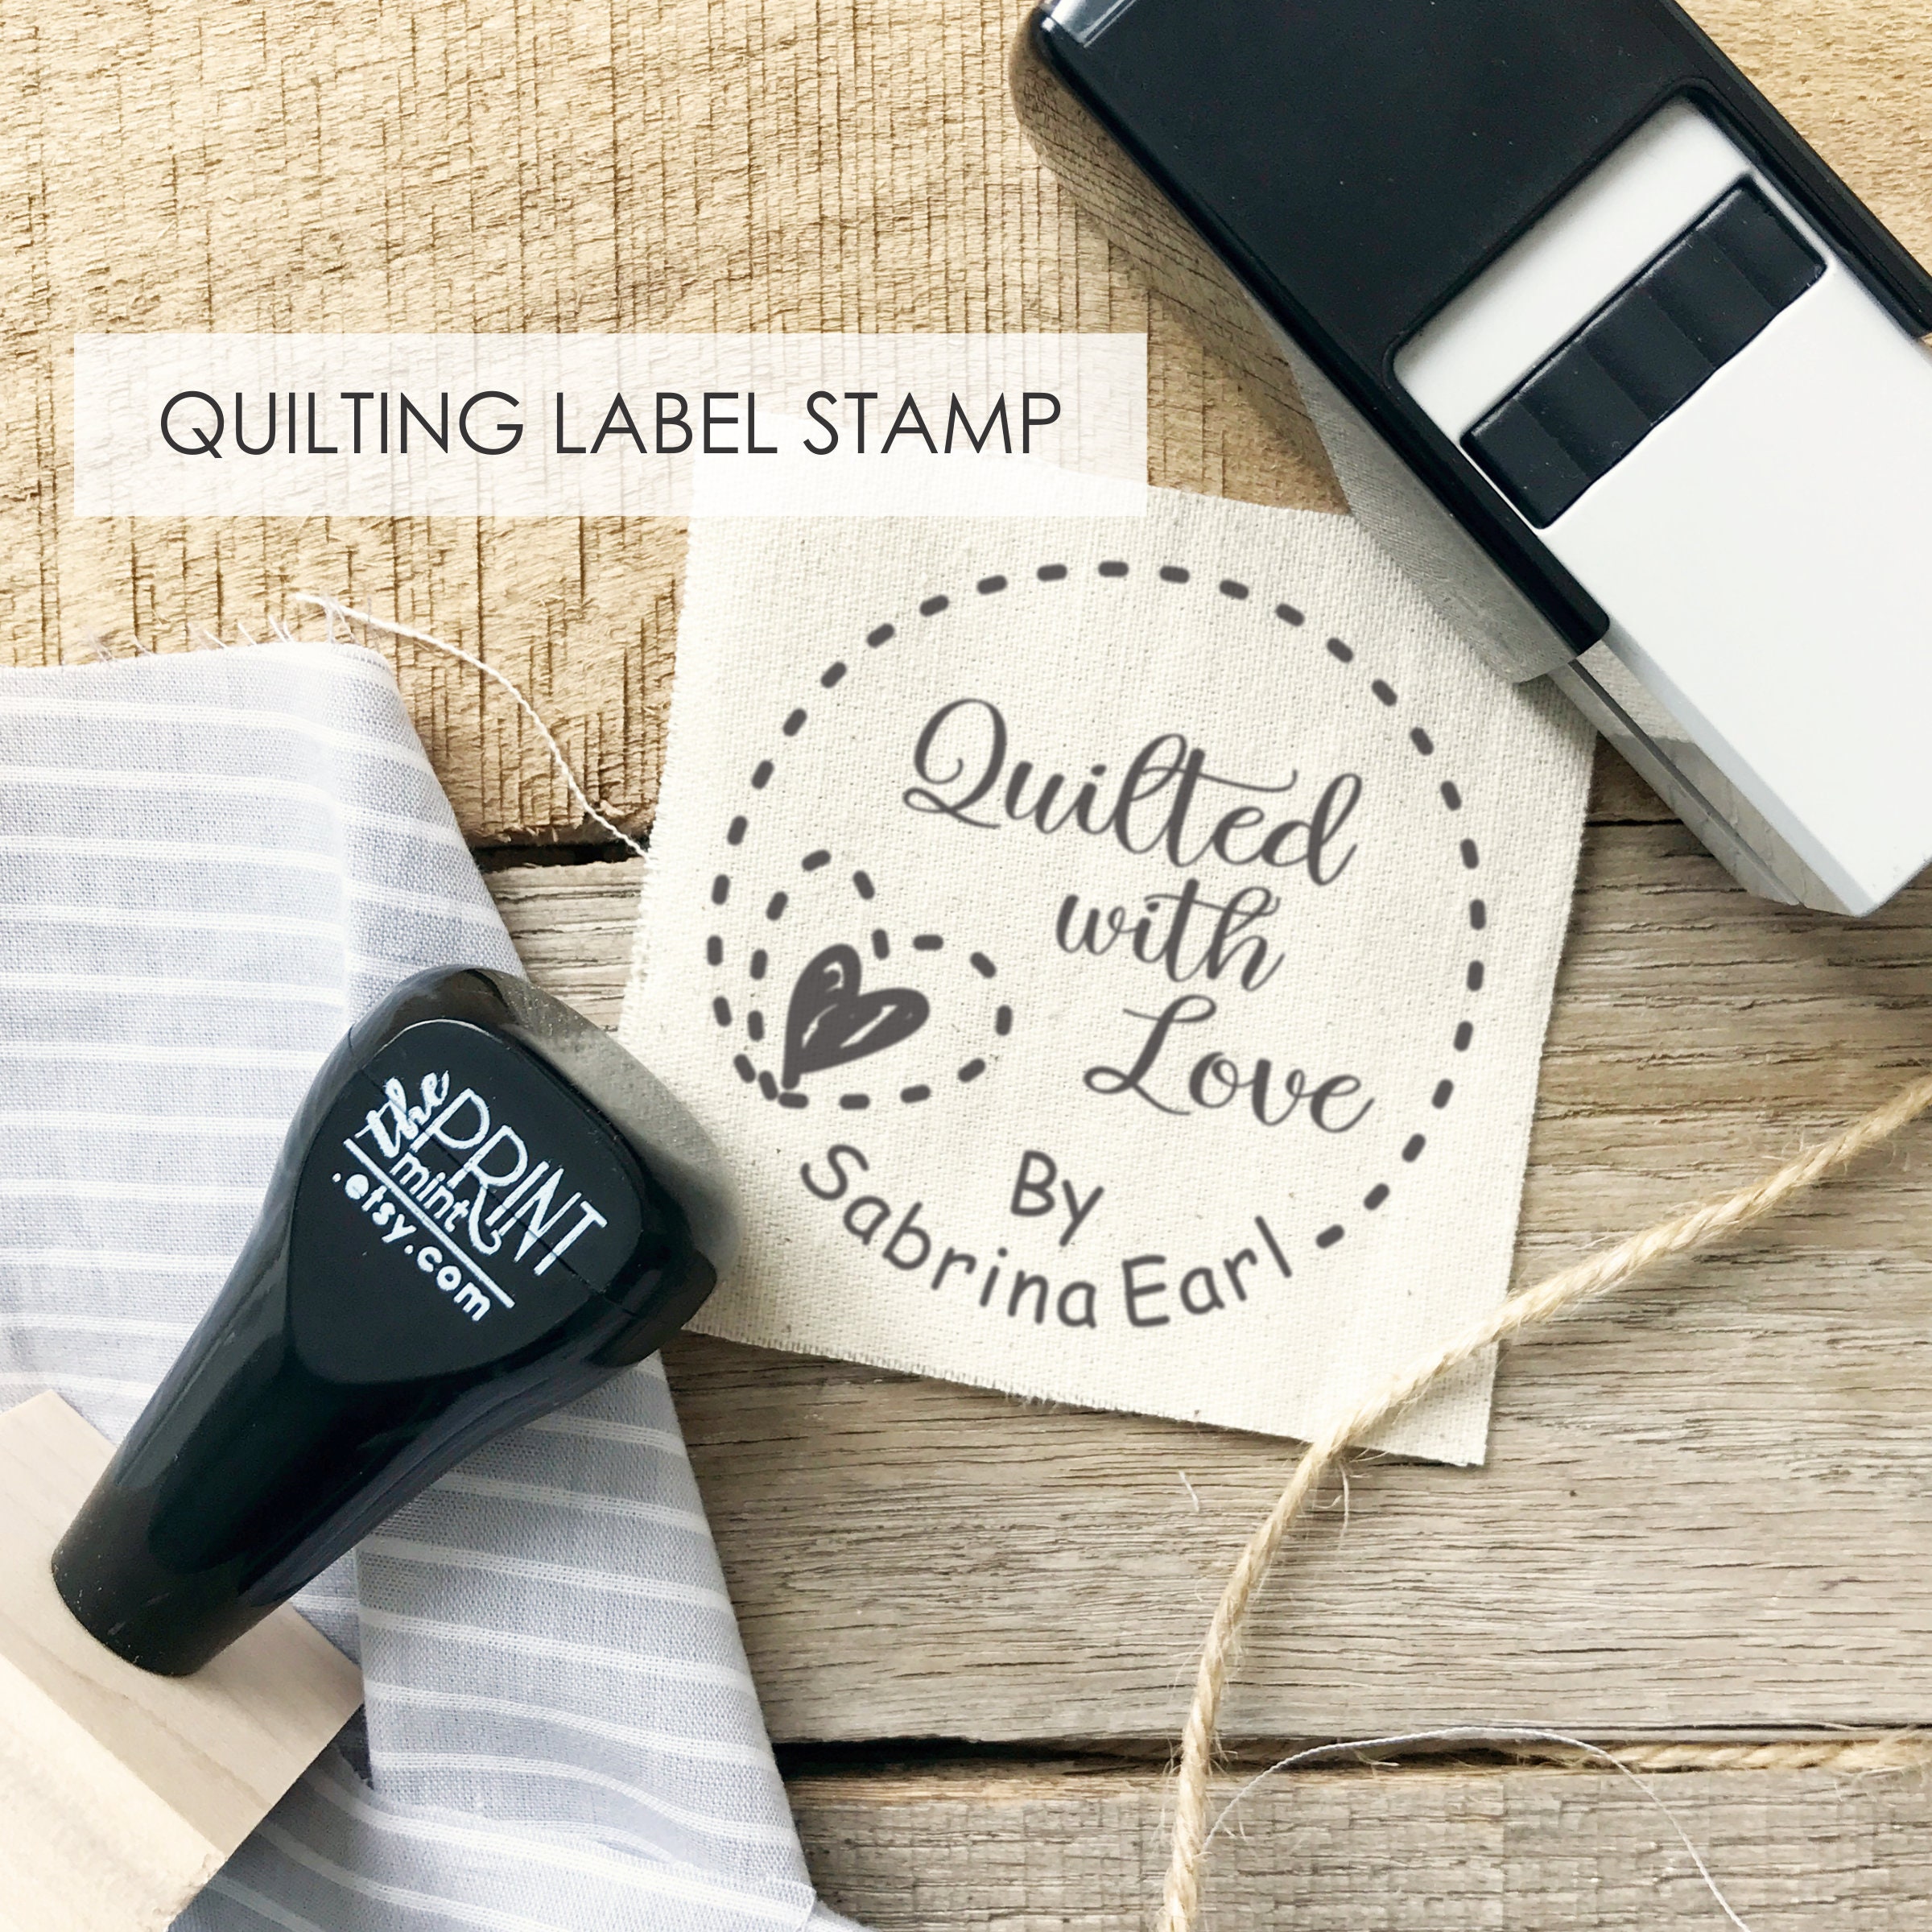 Teacher Name Stamp, Permanent for Any Surface, Personalized